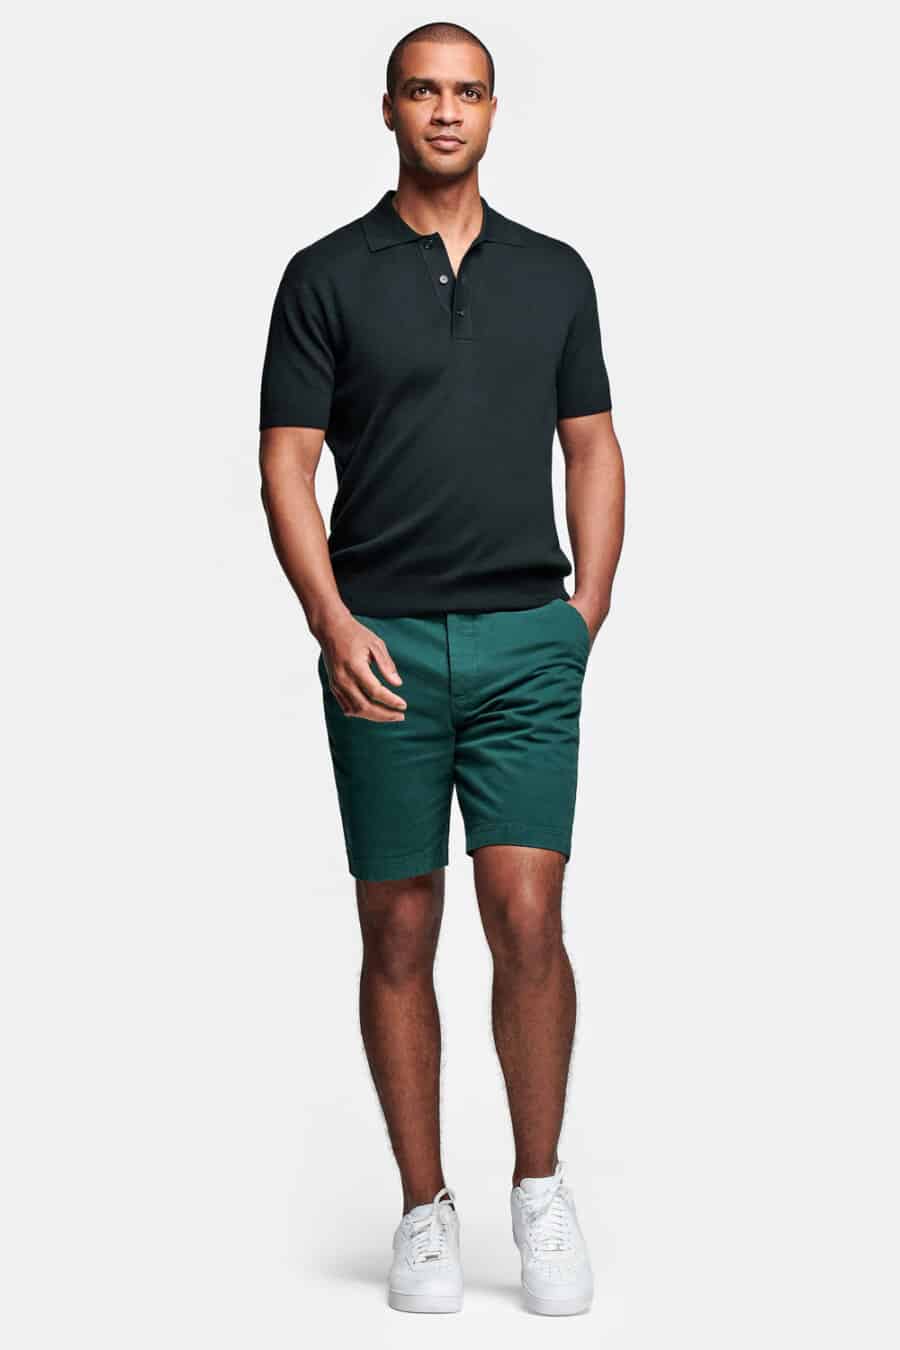 Men's teal green chino shorts, black polo shirt and white sneakers outfit